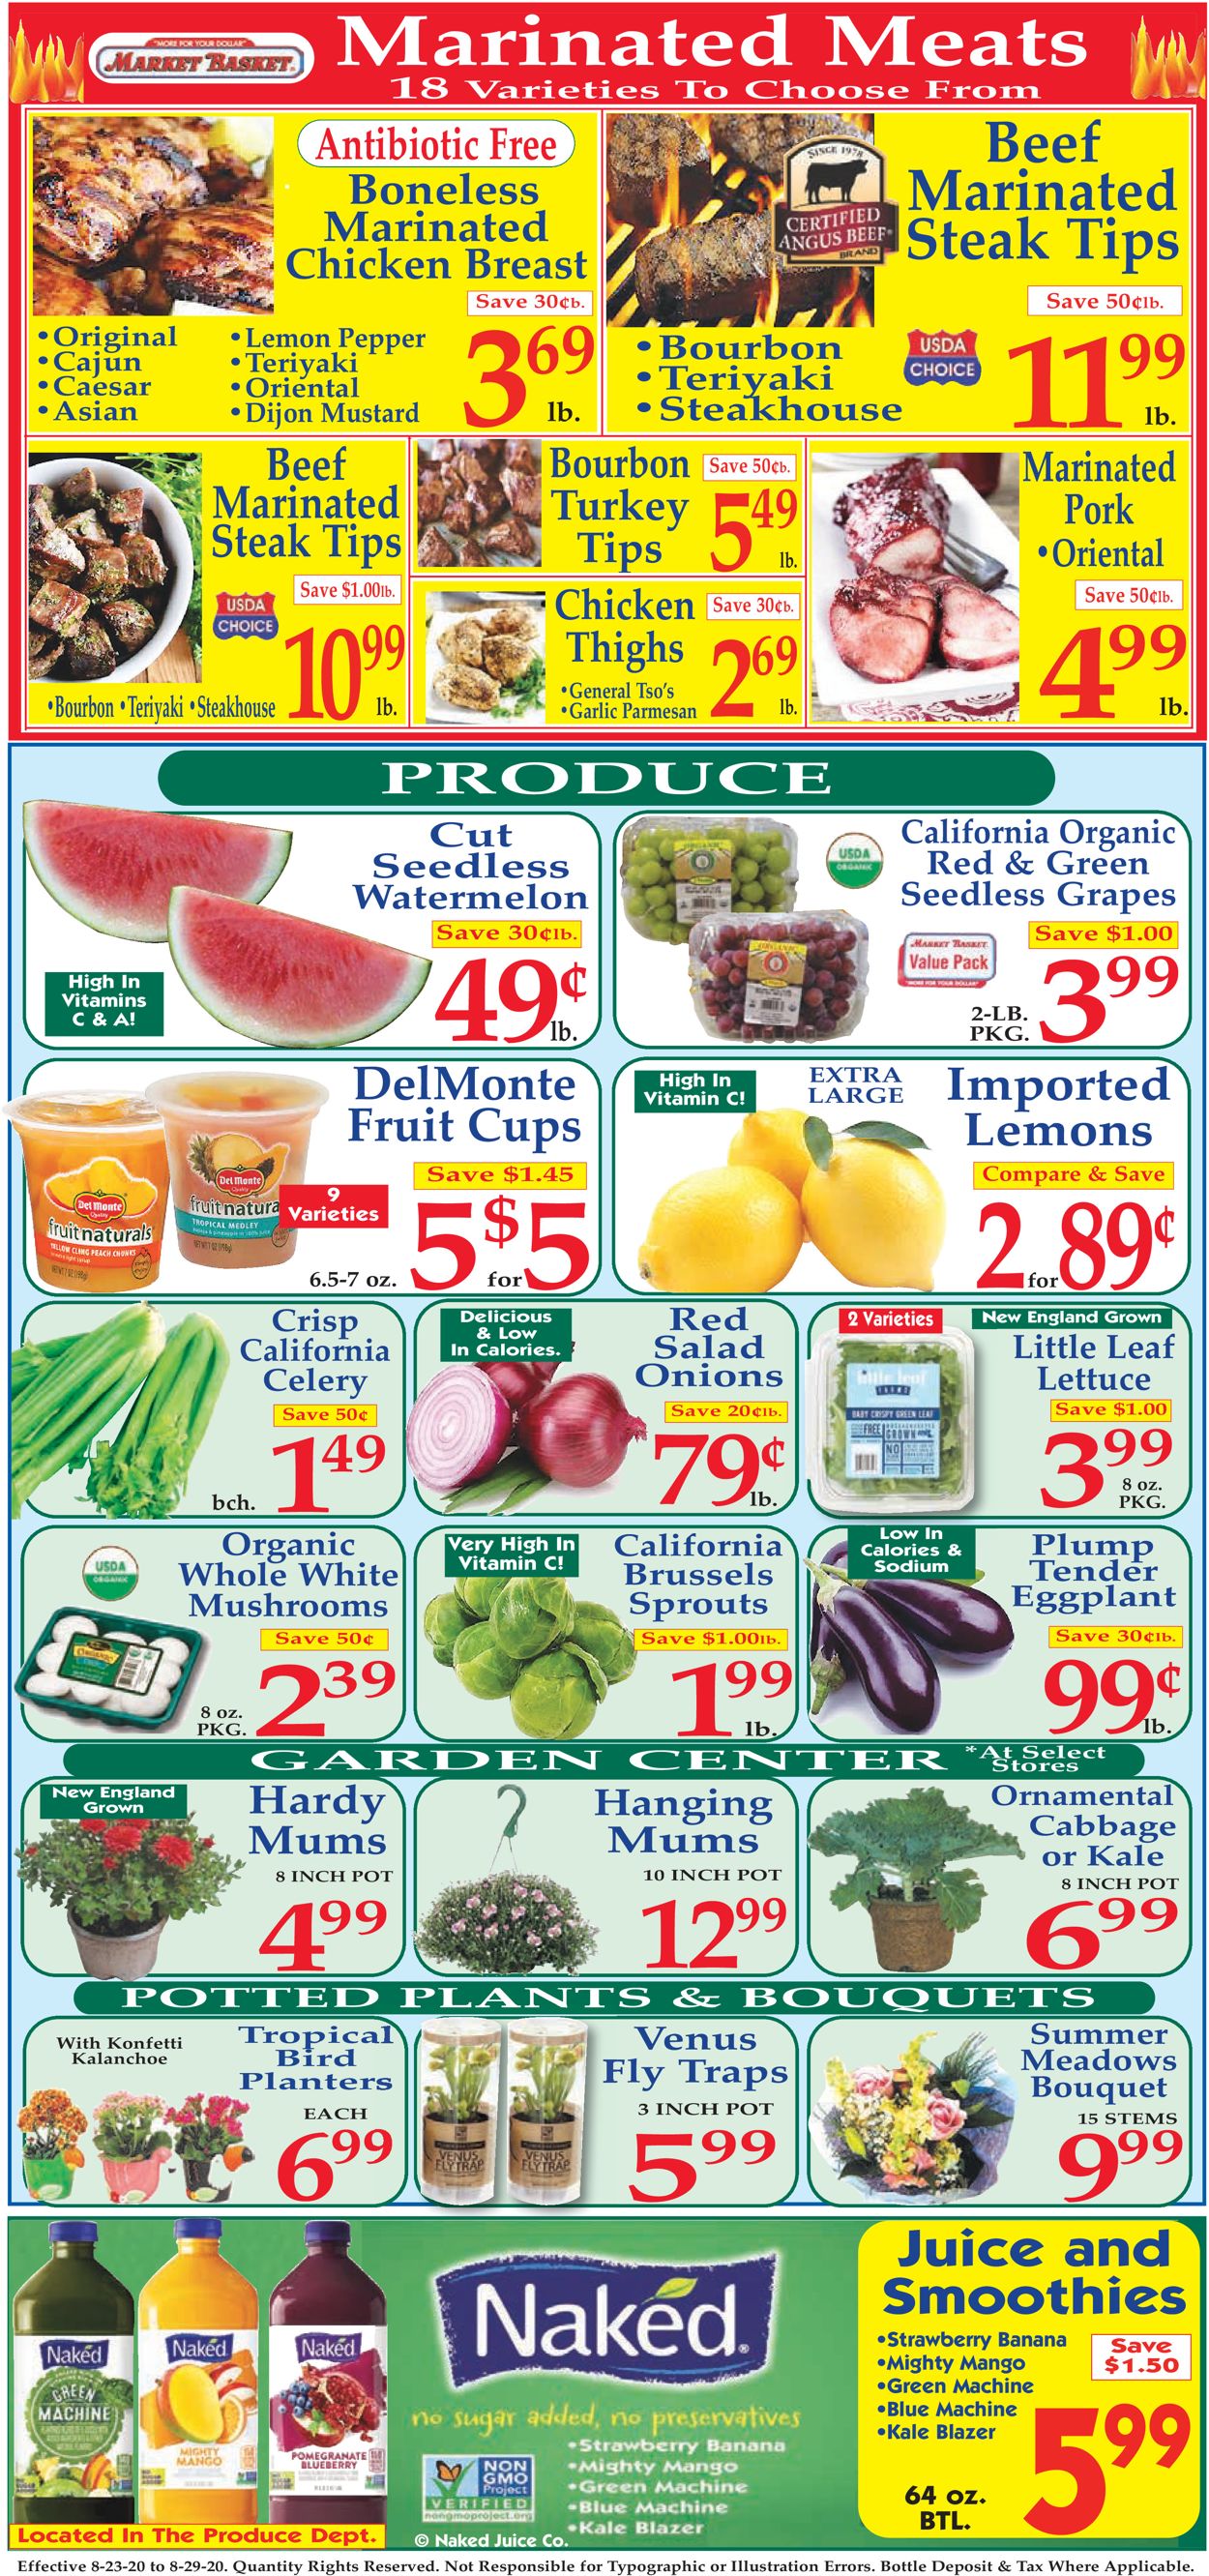 Market Basket Ad from 08/23/2020